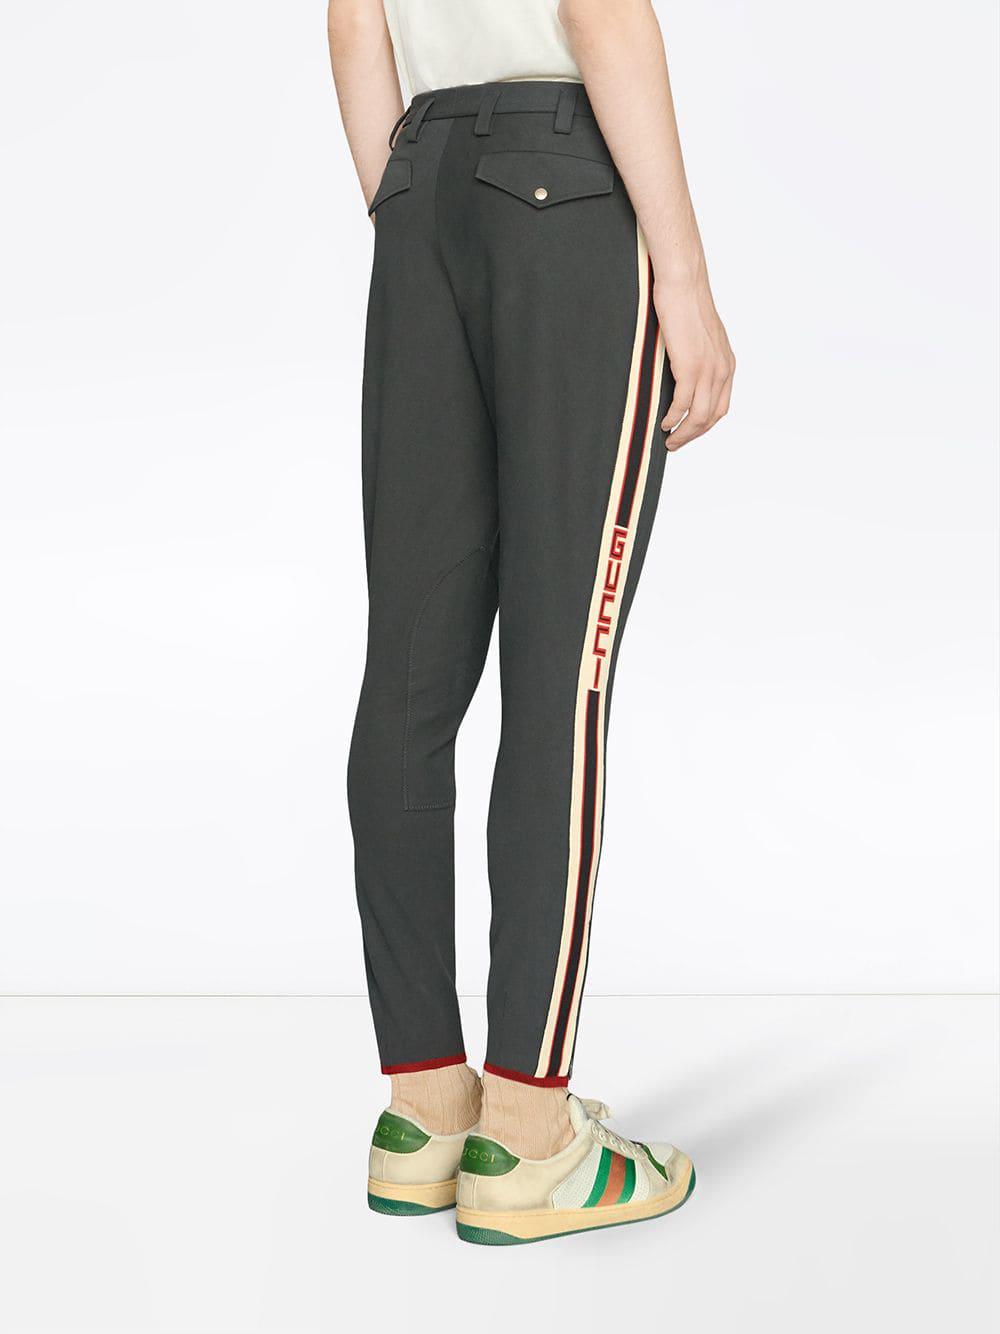 Gucci Gabardine Stretch Pant With Stripe in Grey (Grey) for Men - Lyst